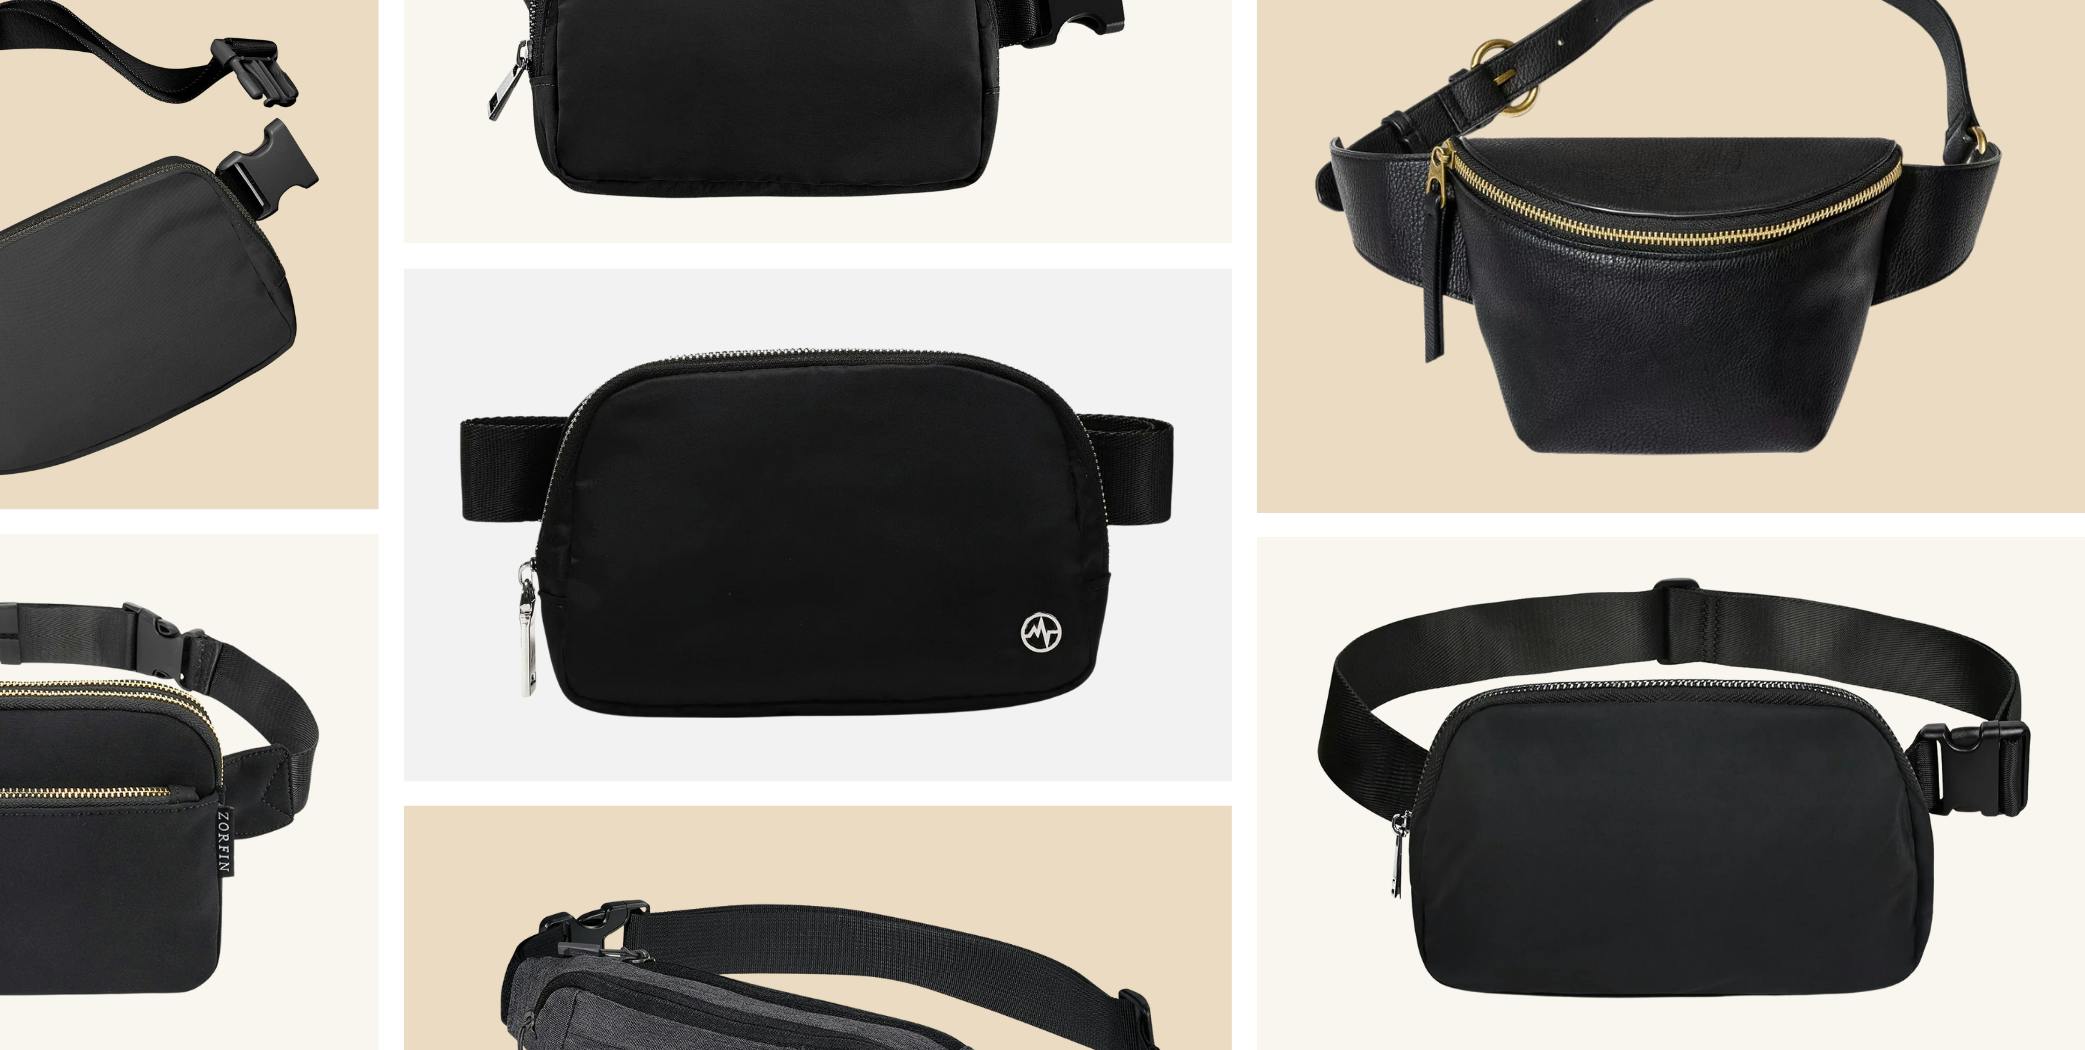 The Lole belt bag found at Costco is a great dupe for the hard-to